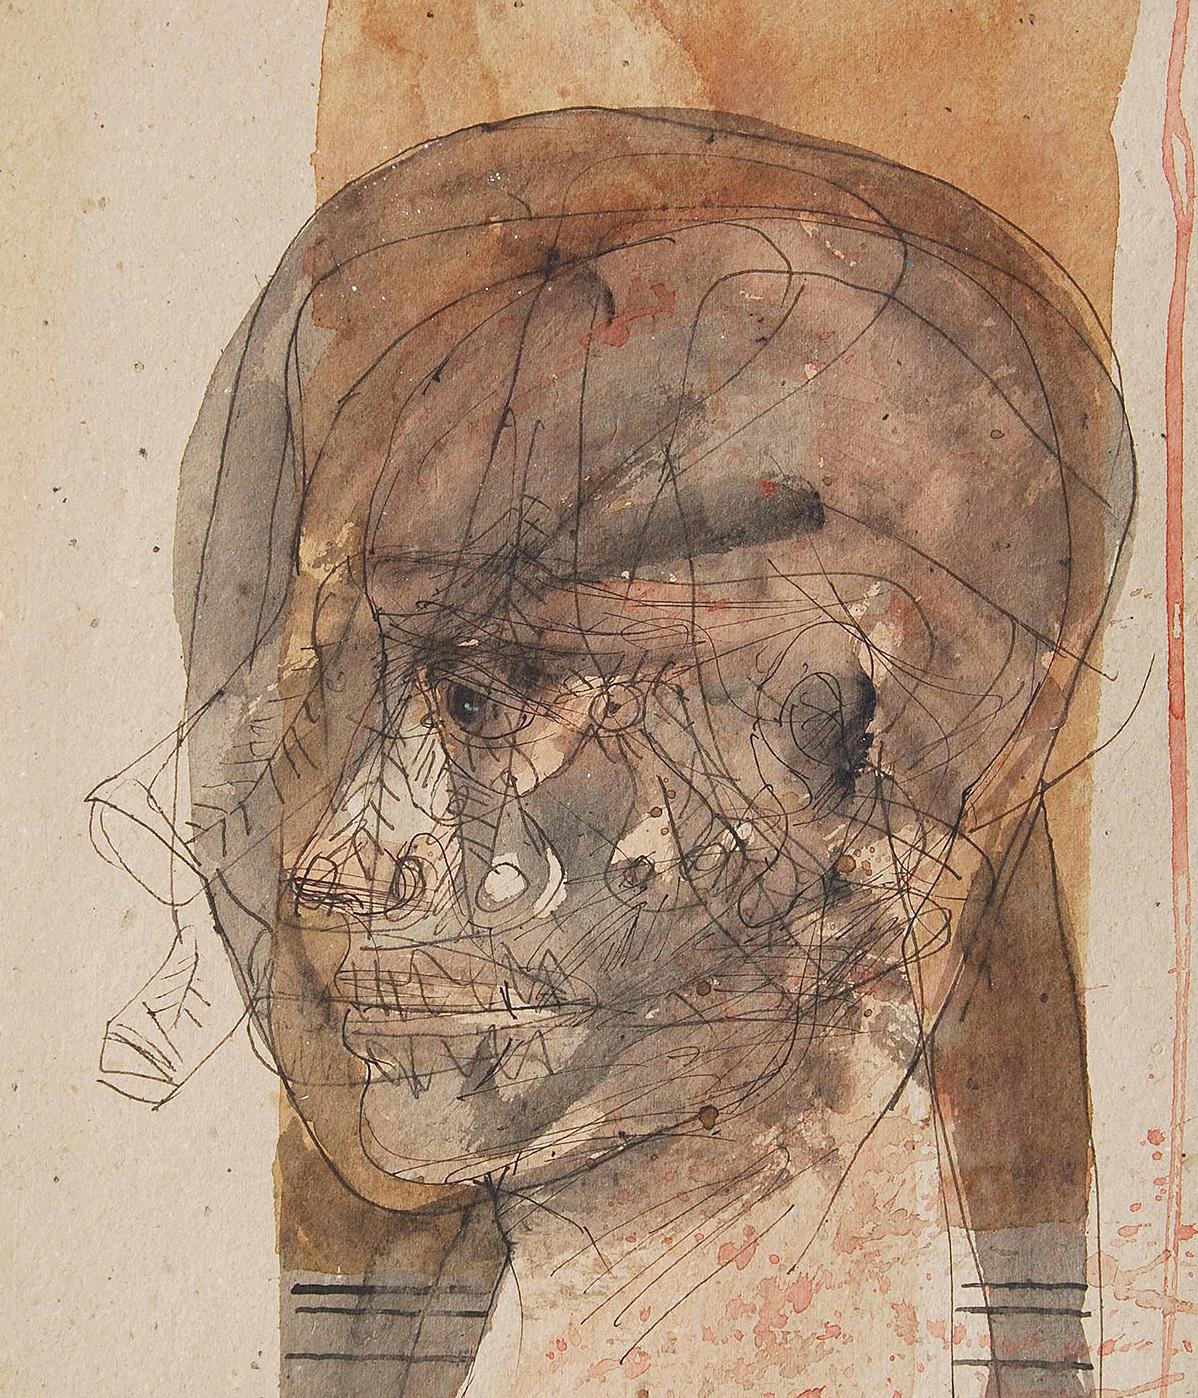 Sunil Das - Head II - 20 x 15 inches (unframed size)
Mixed Media on Board, 2002
Inclusive of shipment in ready to hang form.

Sunil Das (1939-2015) was a Master Modern Indian Artist from Bengal. Extremely successful right from his college days,